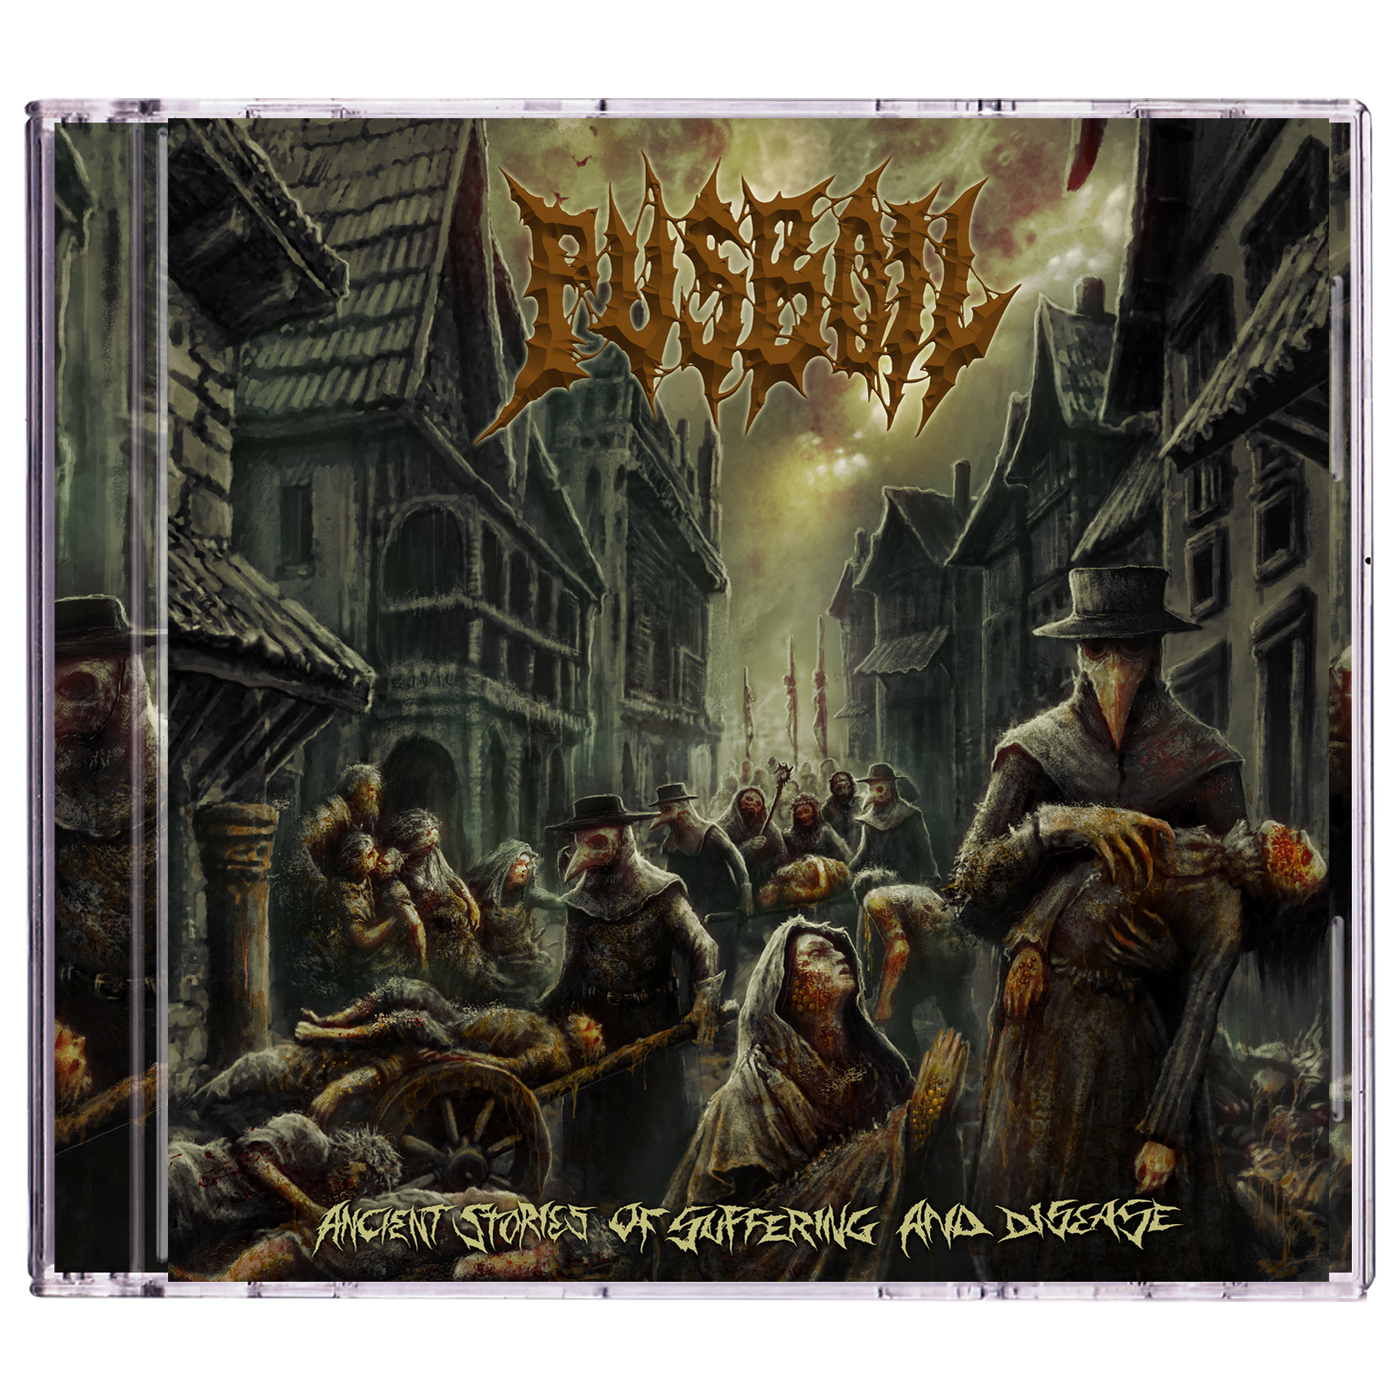 Pusboil 'Ancient Stories of Suffering and Disease' CD